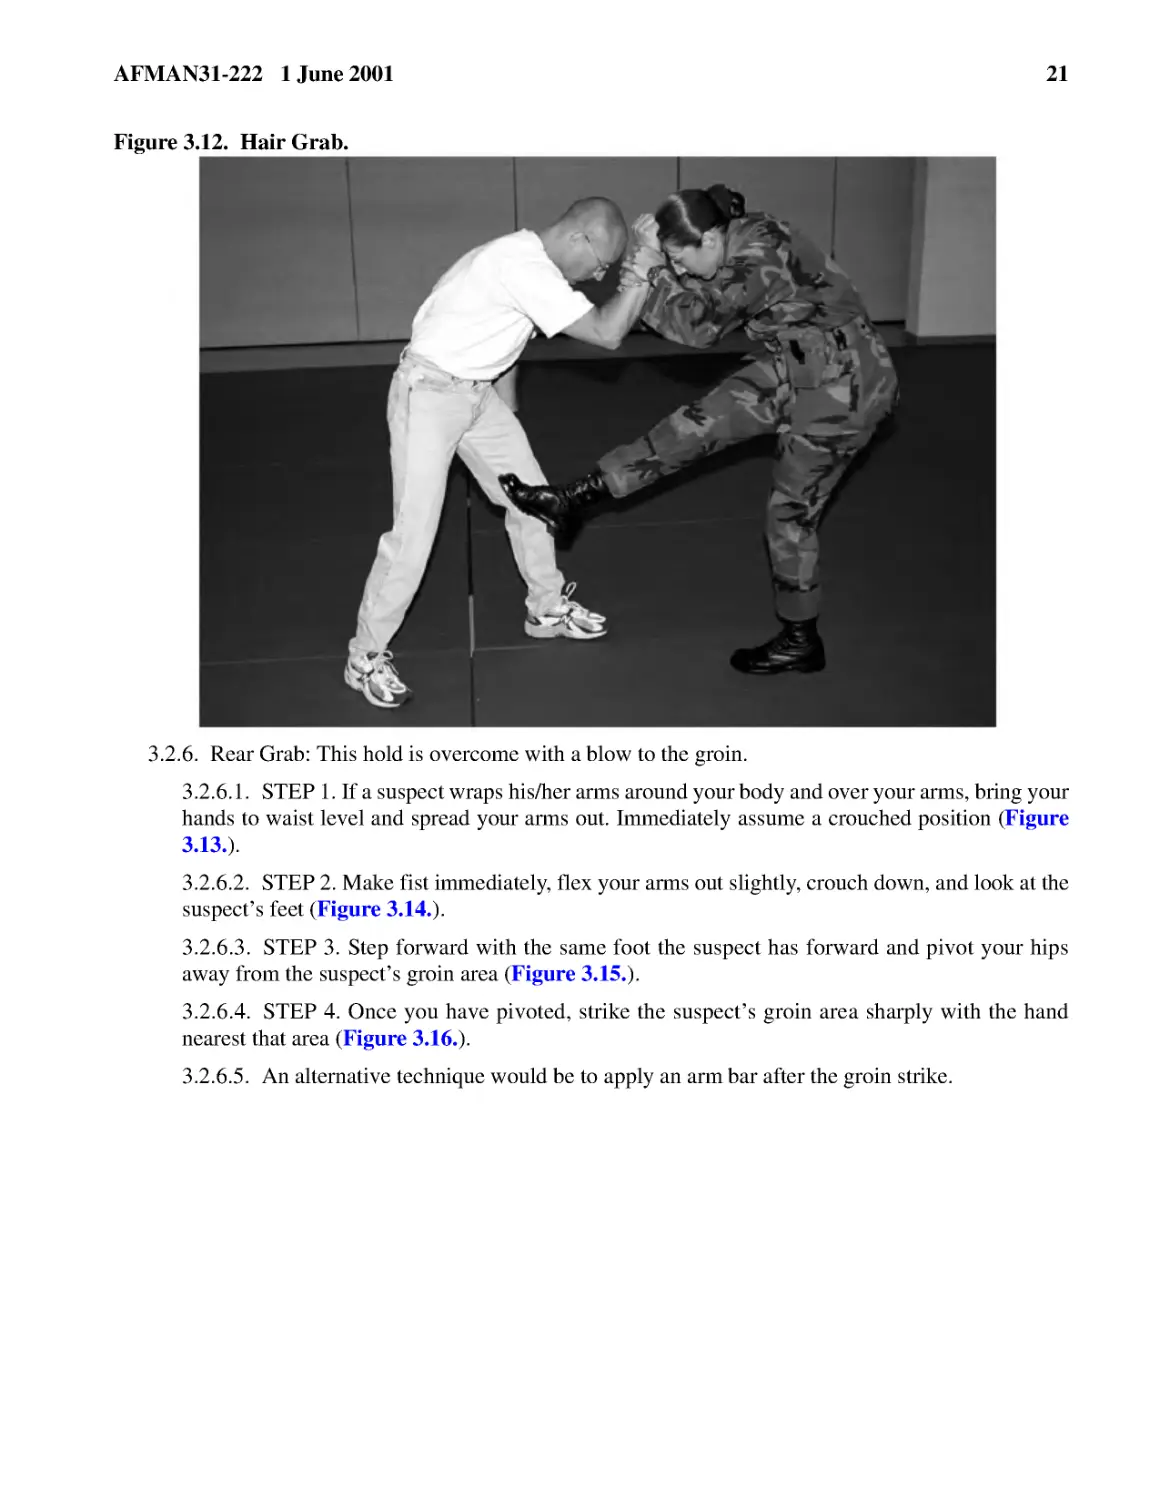 Figure 3.12.� Hair Grab.
3.2.6.� Rear Grab: This hold is overcome with a blow to the groin.
3.2.6.2.� STEP 2. Make fist immediately, flex your arms out slightly, crouch down, and look at th...
3.2.6.3.� STEP 3. Step forward with the same foot the suspect has forward and pivot your hips awa...
3.2.6.4.� STEP 4. Once you have pivoted, strike the suspect’s groin area sharply with the hand ne...
3.2.6.5.� An alternative technique would be to apply an arm bar after the groin strike.